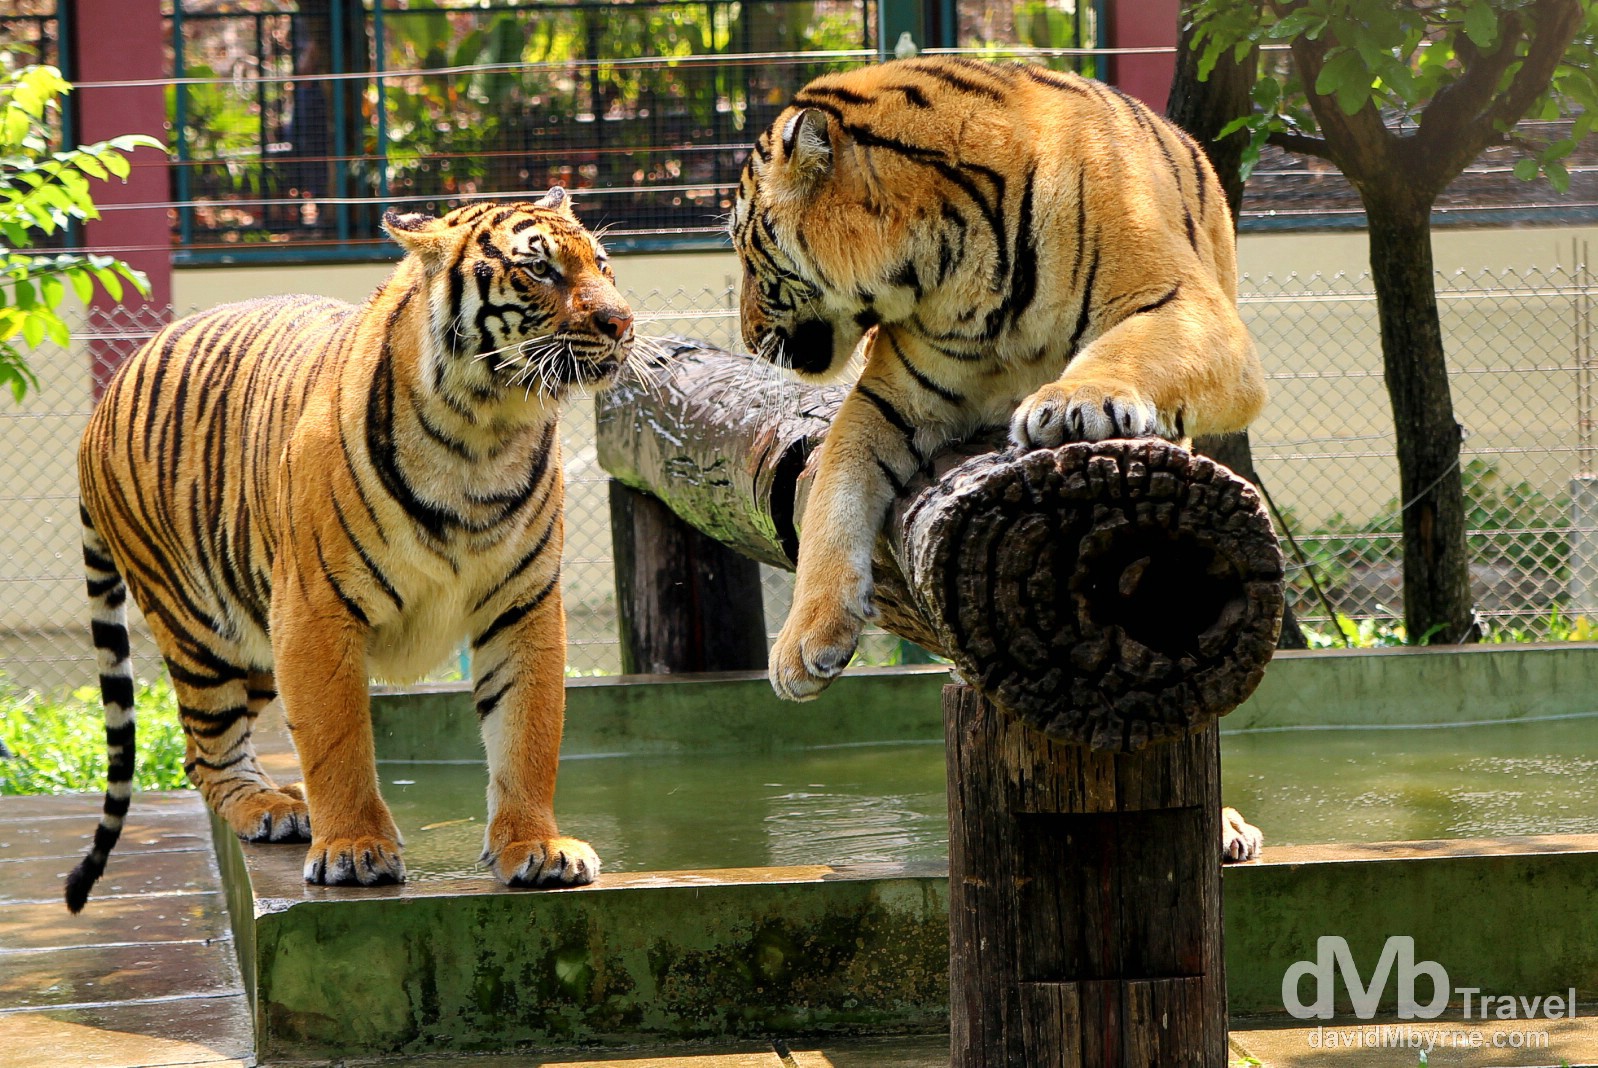 Tigers in an enclosure at Tiger Kingdom on the outskirts of Chiang Mai, northern Thailand. March 14th 2012.